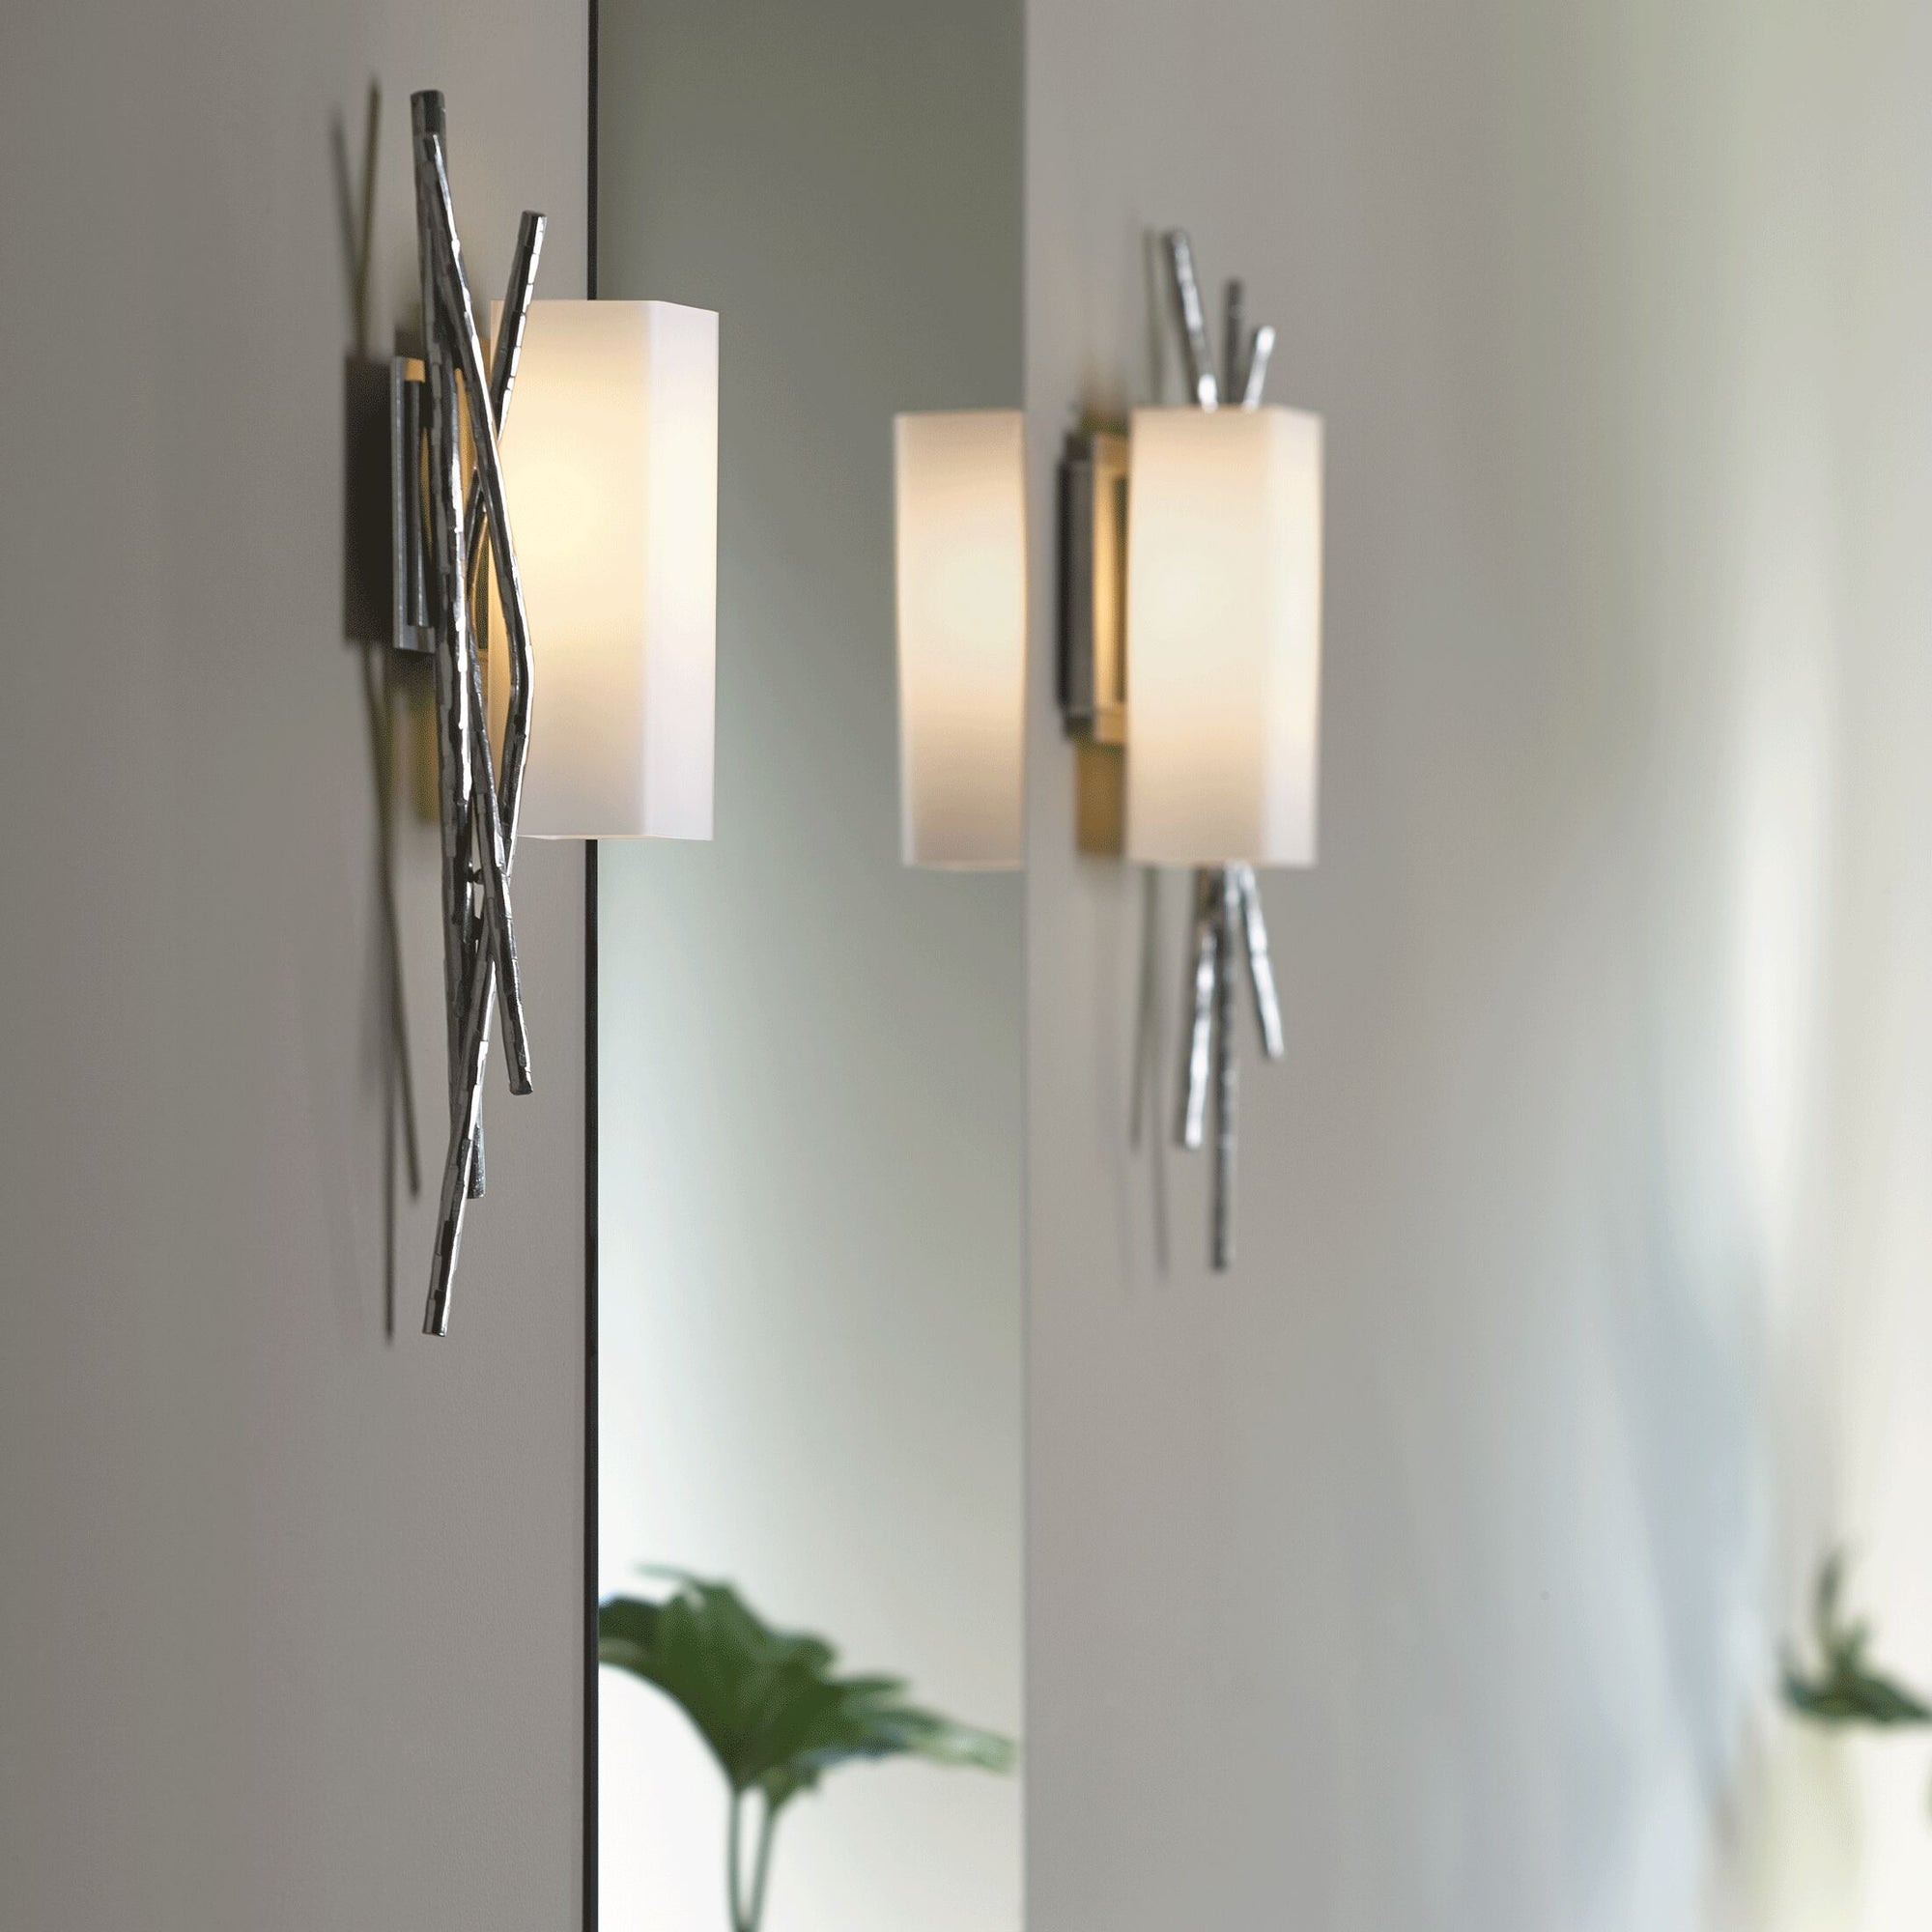 Hubbardton Forge Brindille Wall Sconce